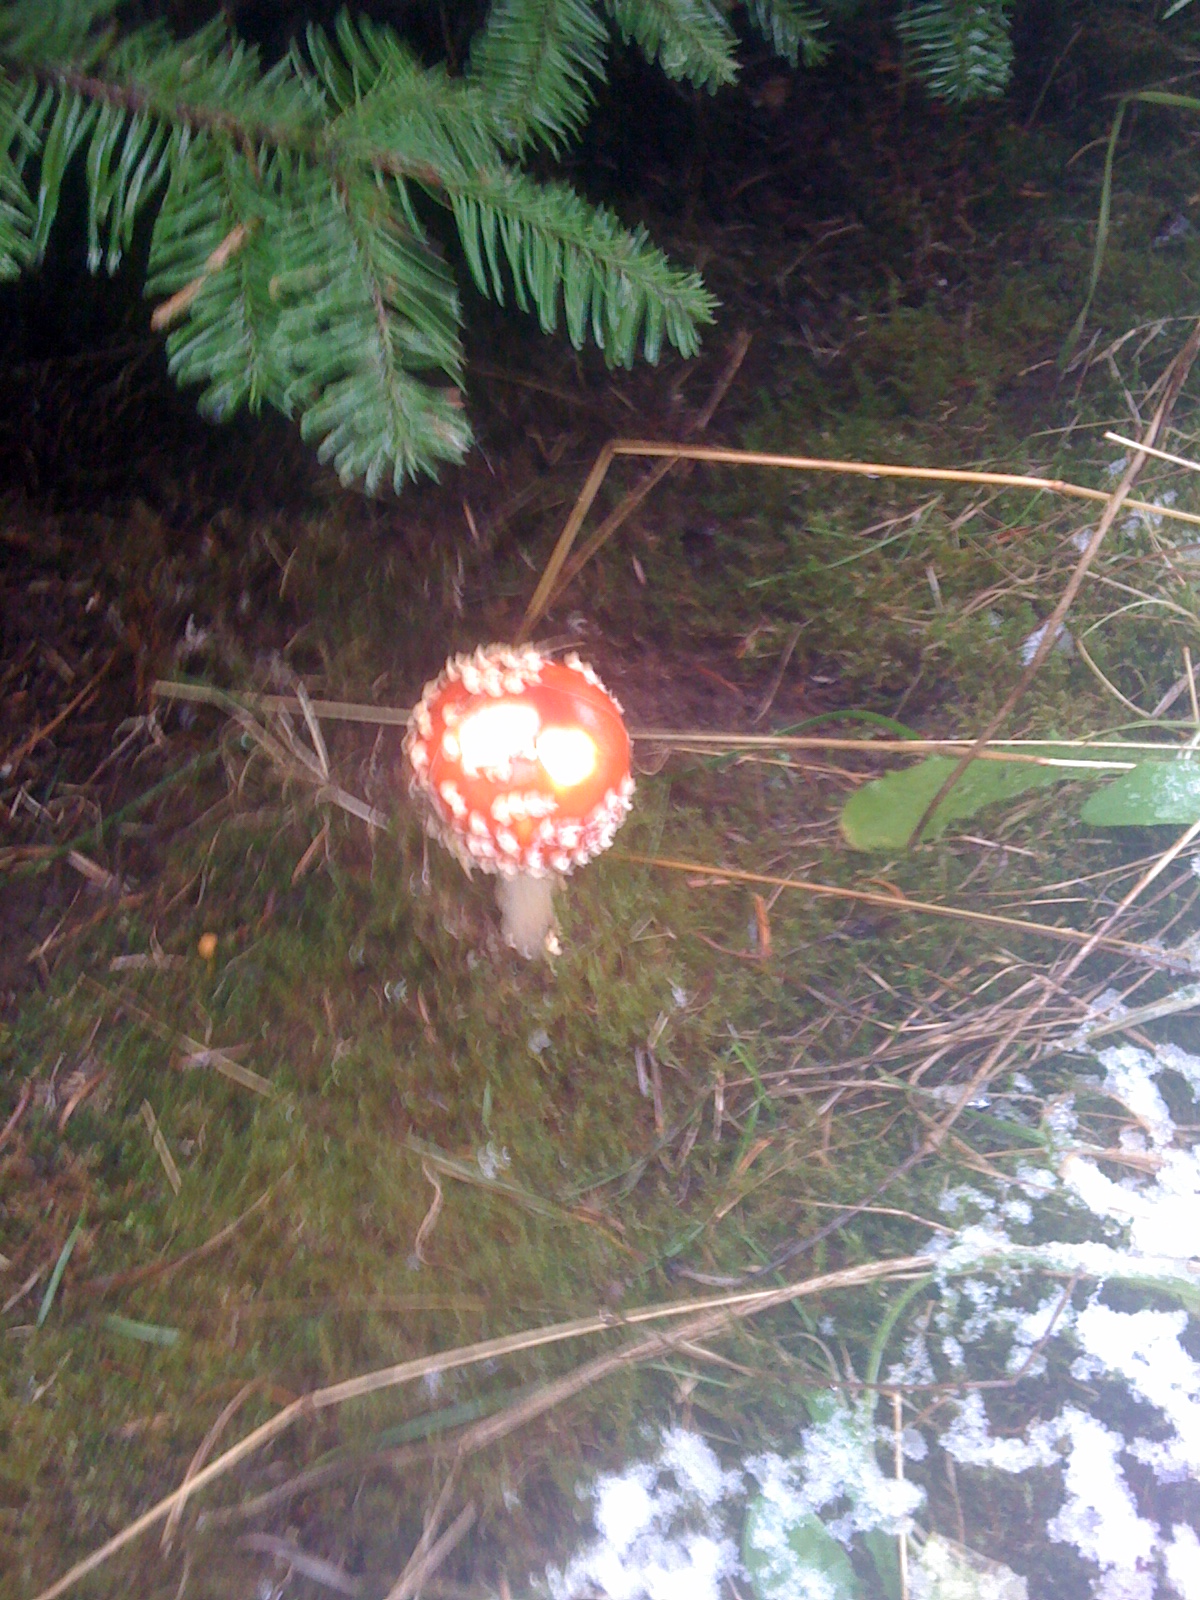 I found this while I was mushroom hunting....I did not have the balls to eat it. 